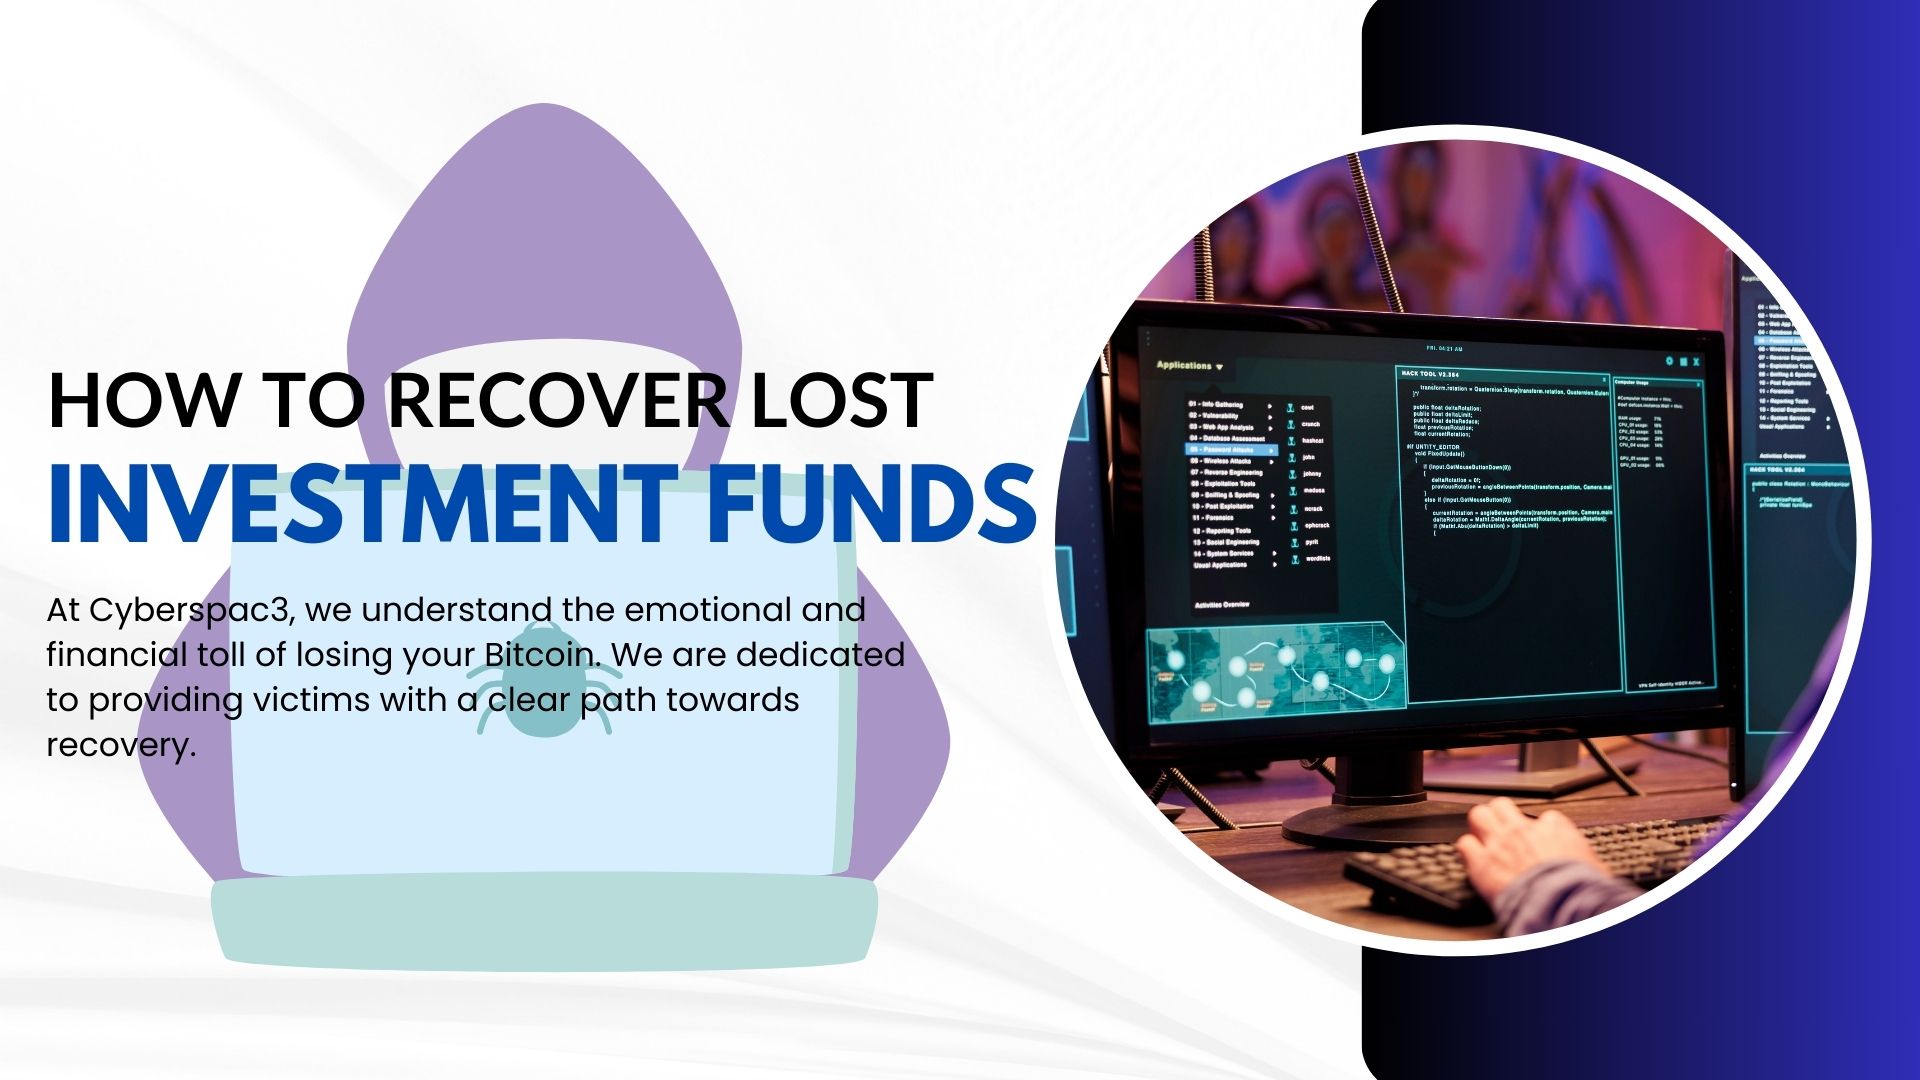 How to Recover Lost Investment Funds